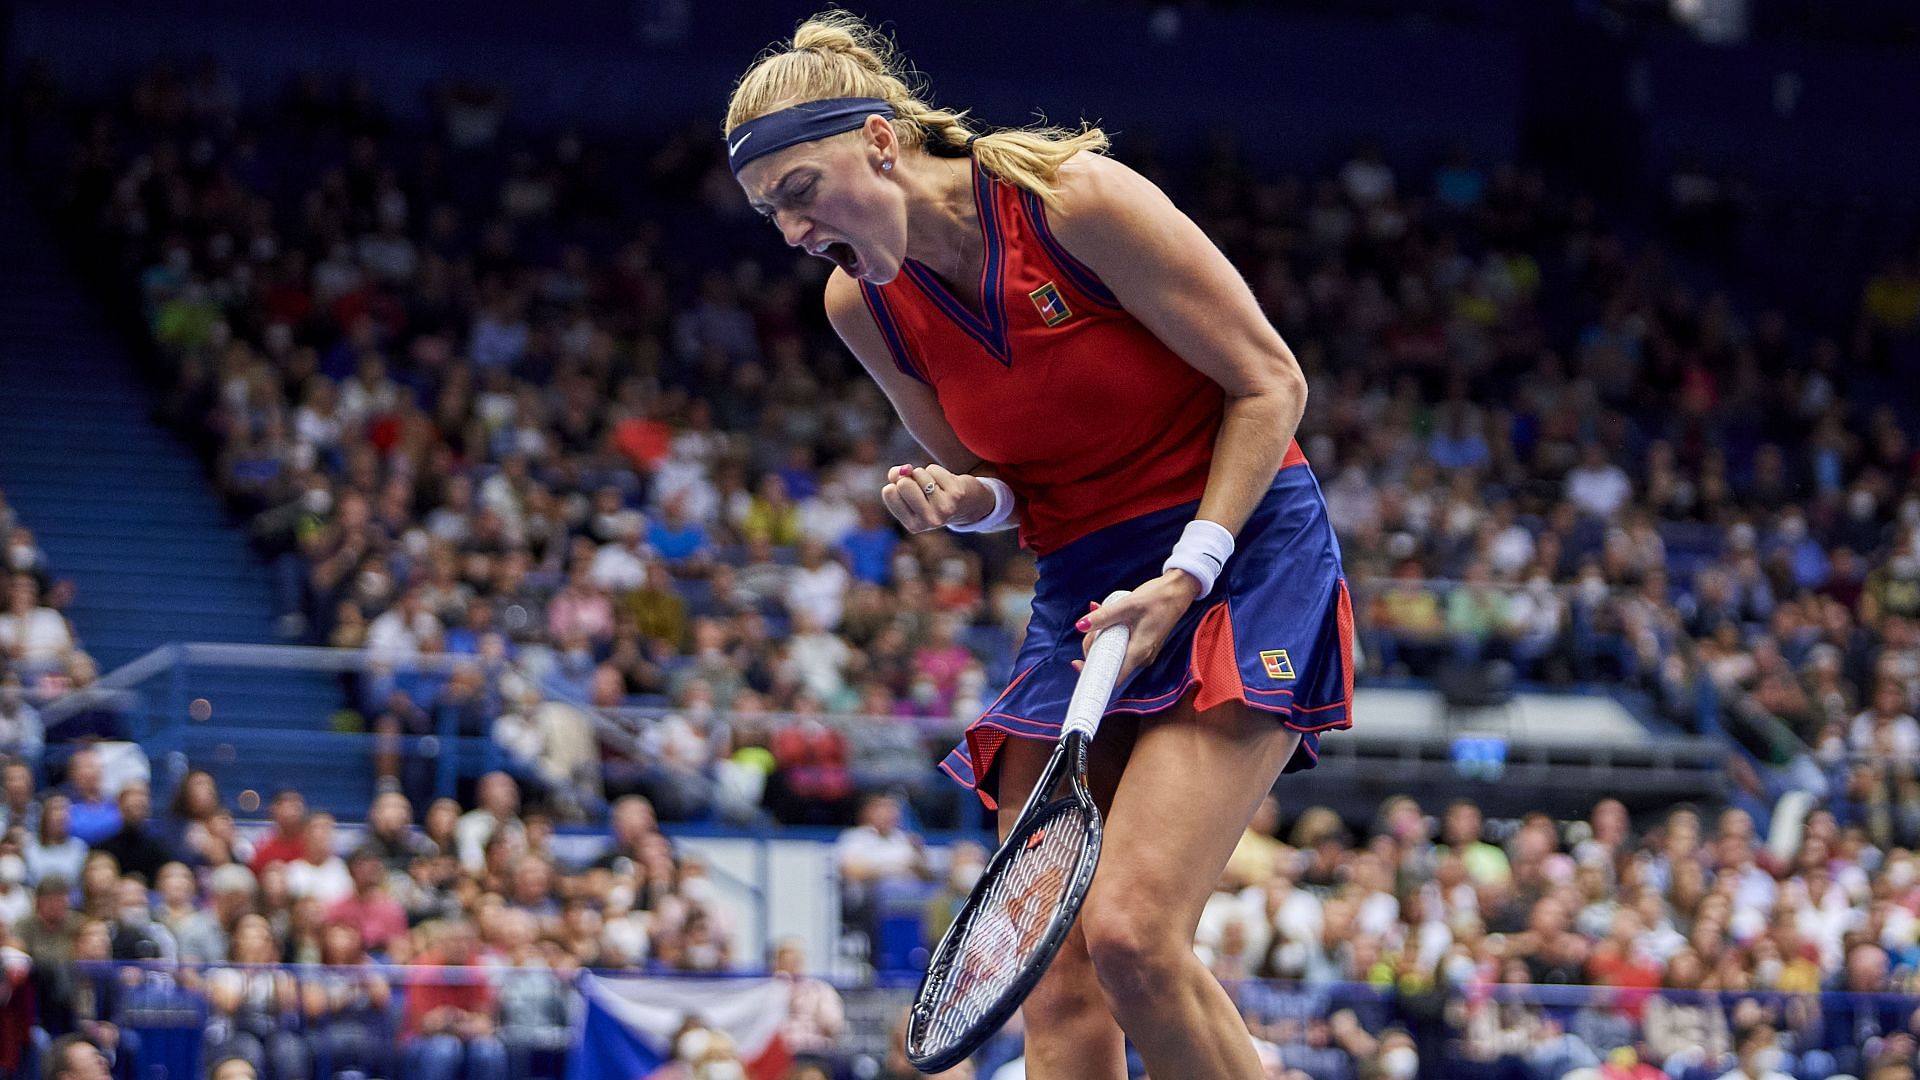 Kvitova notched up a third top-5 for the season by defeating Badosa in her last match.